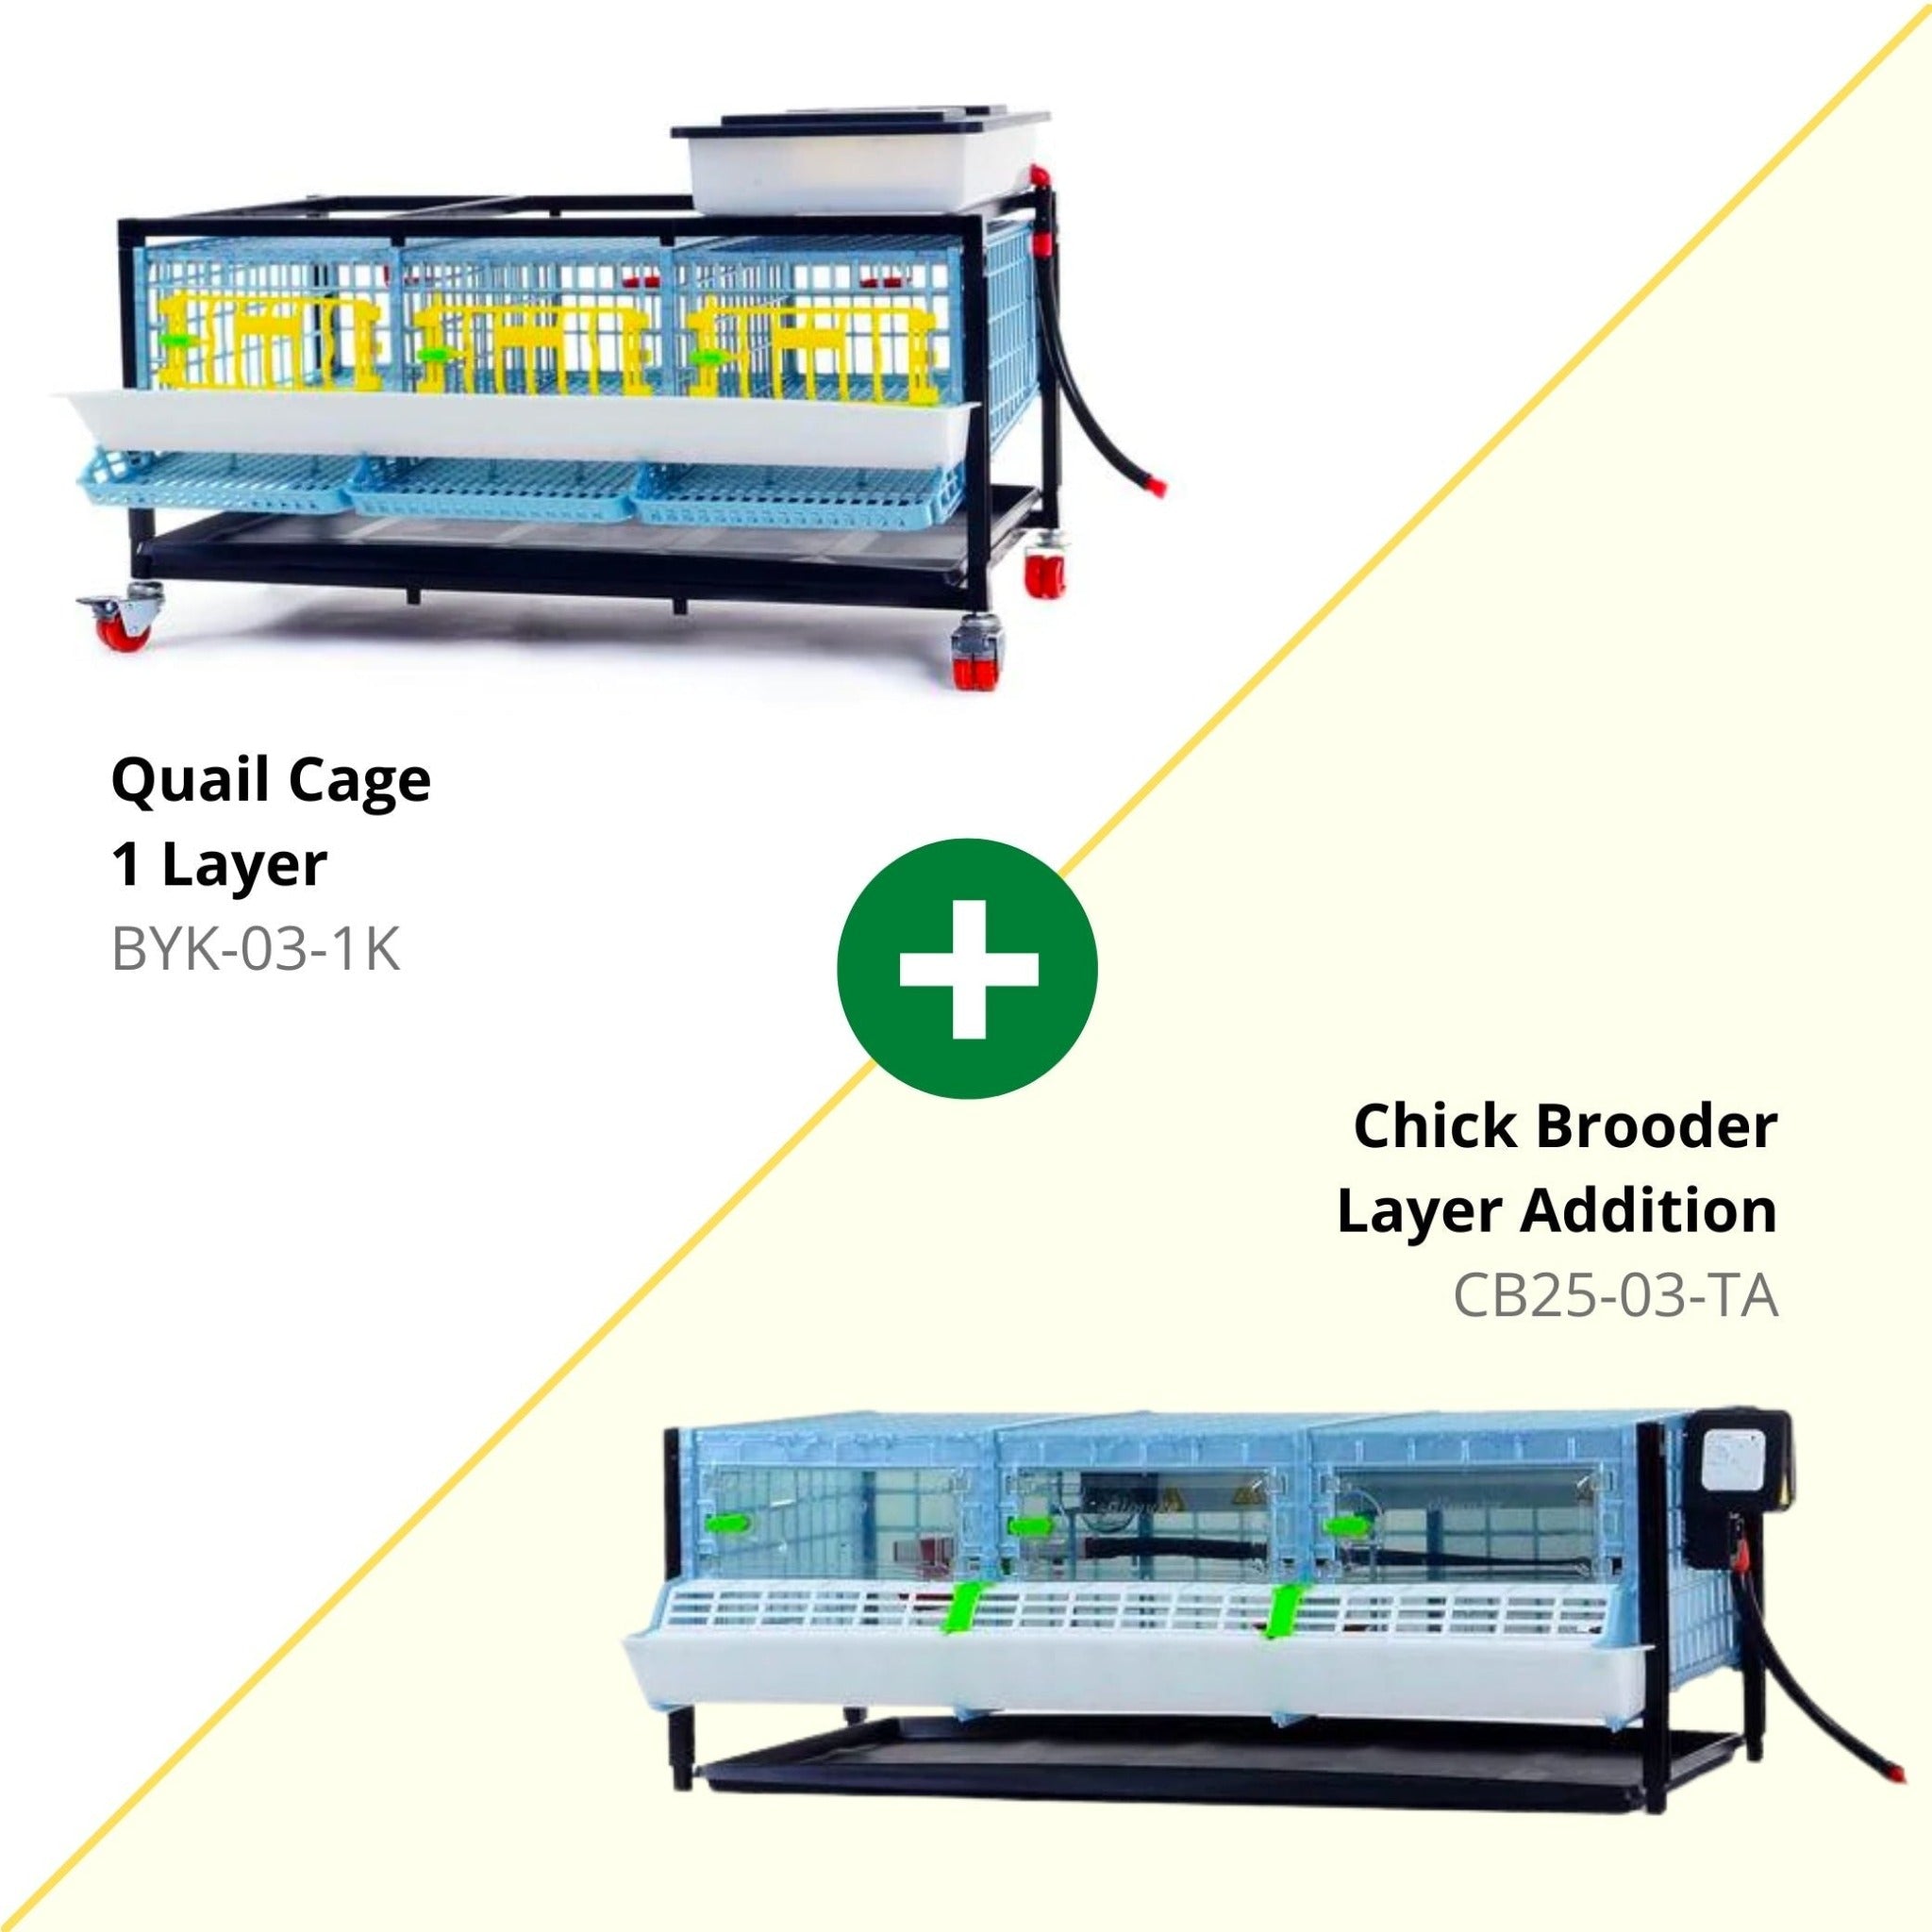 Hatching Time Cimuka Image shows that both the BYK-03-1k and CB25-03-TA enclosures are included in the Quail starter kit.